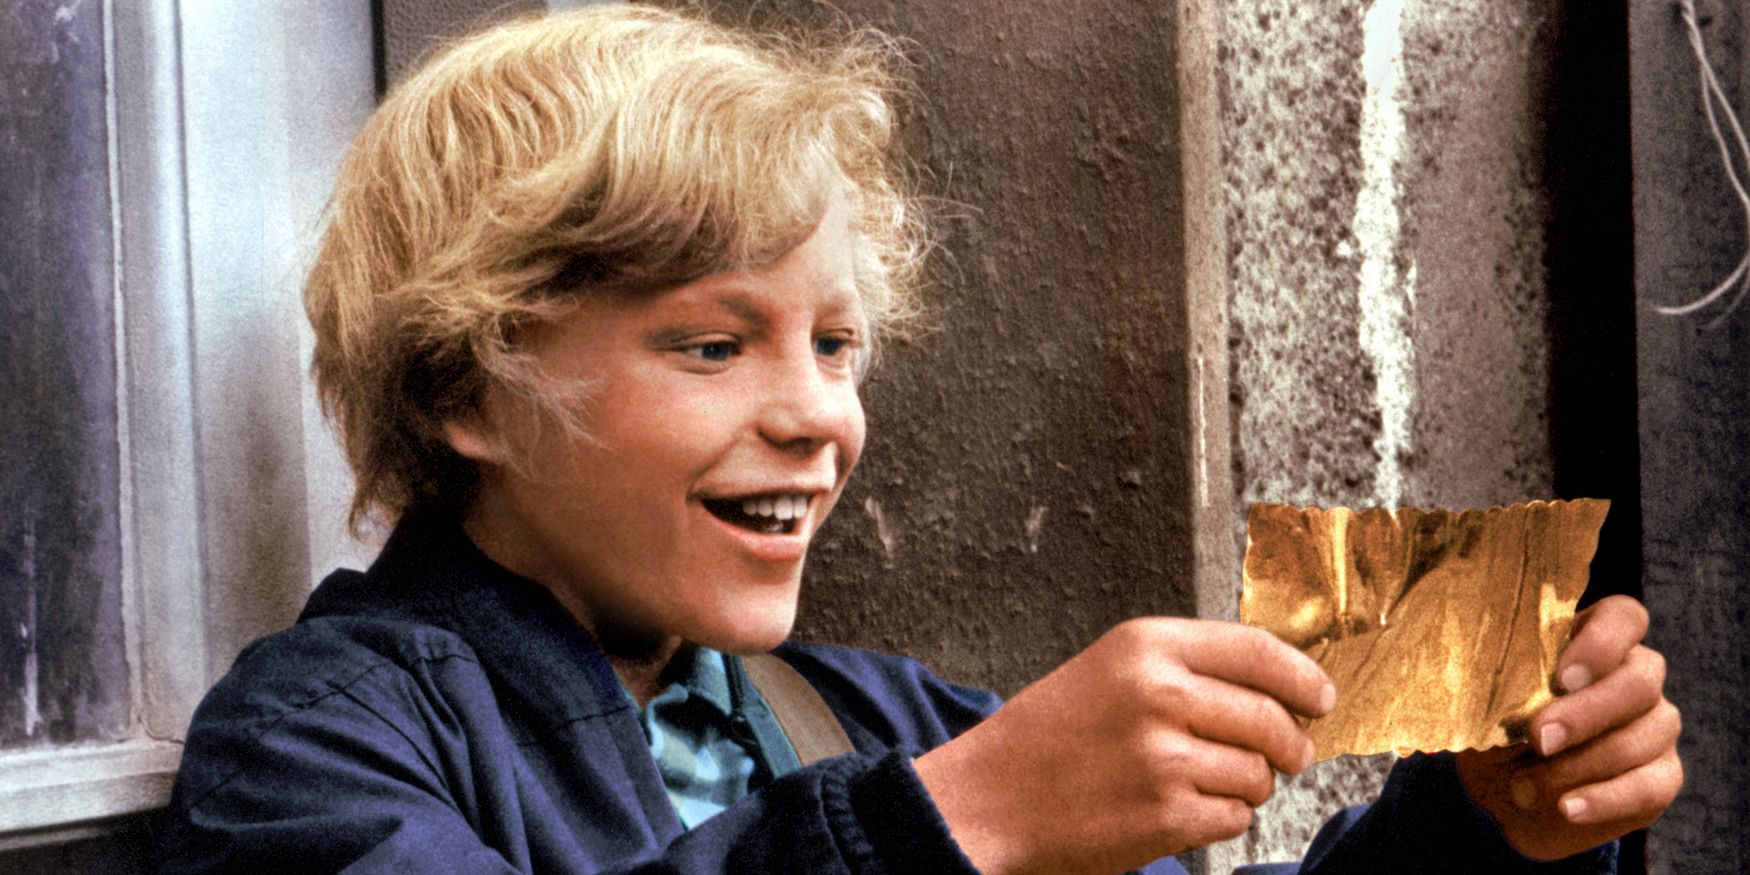 Peter Ostrum as Charlie gazing at a Golden Ticket in awe in Willy Wonka & The Chocolate Factory